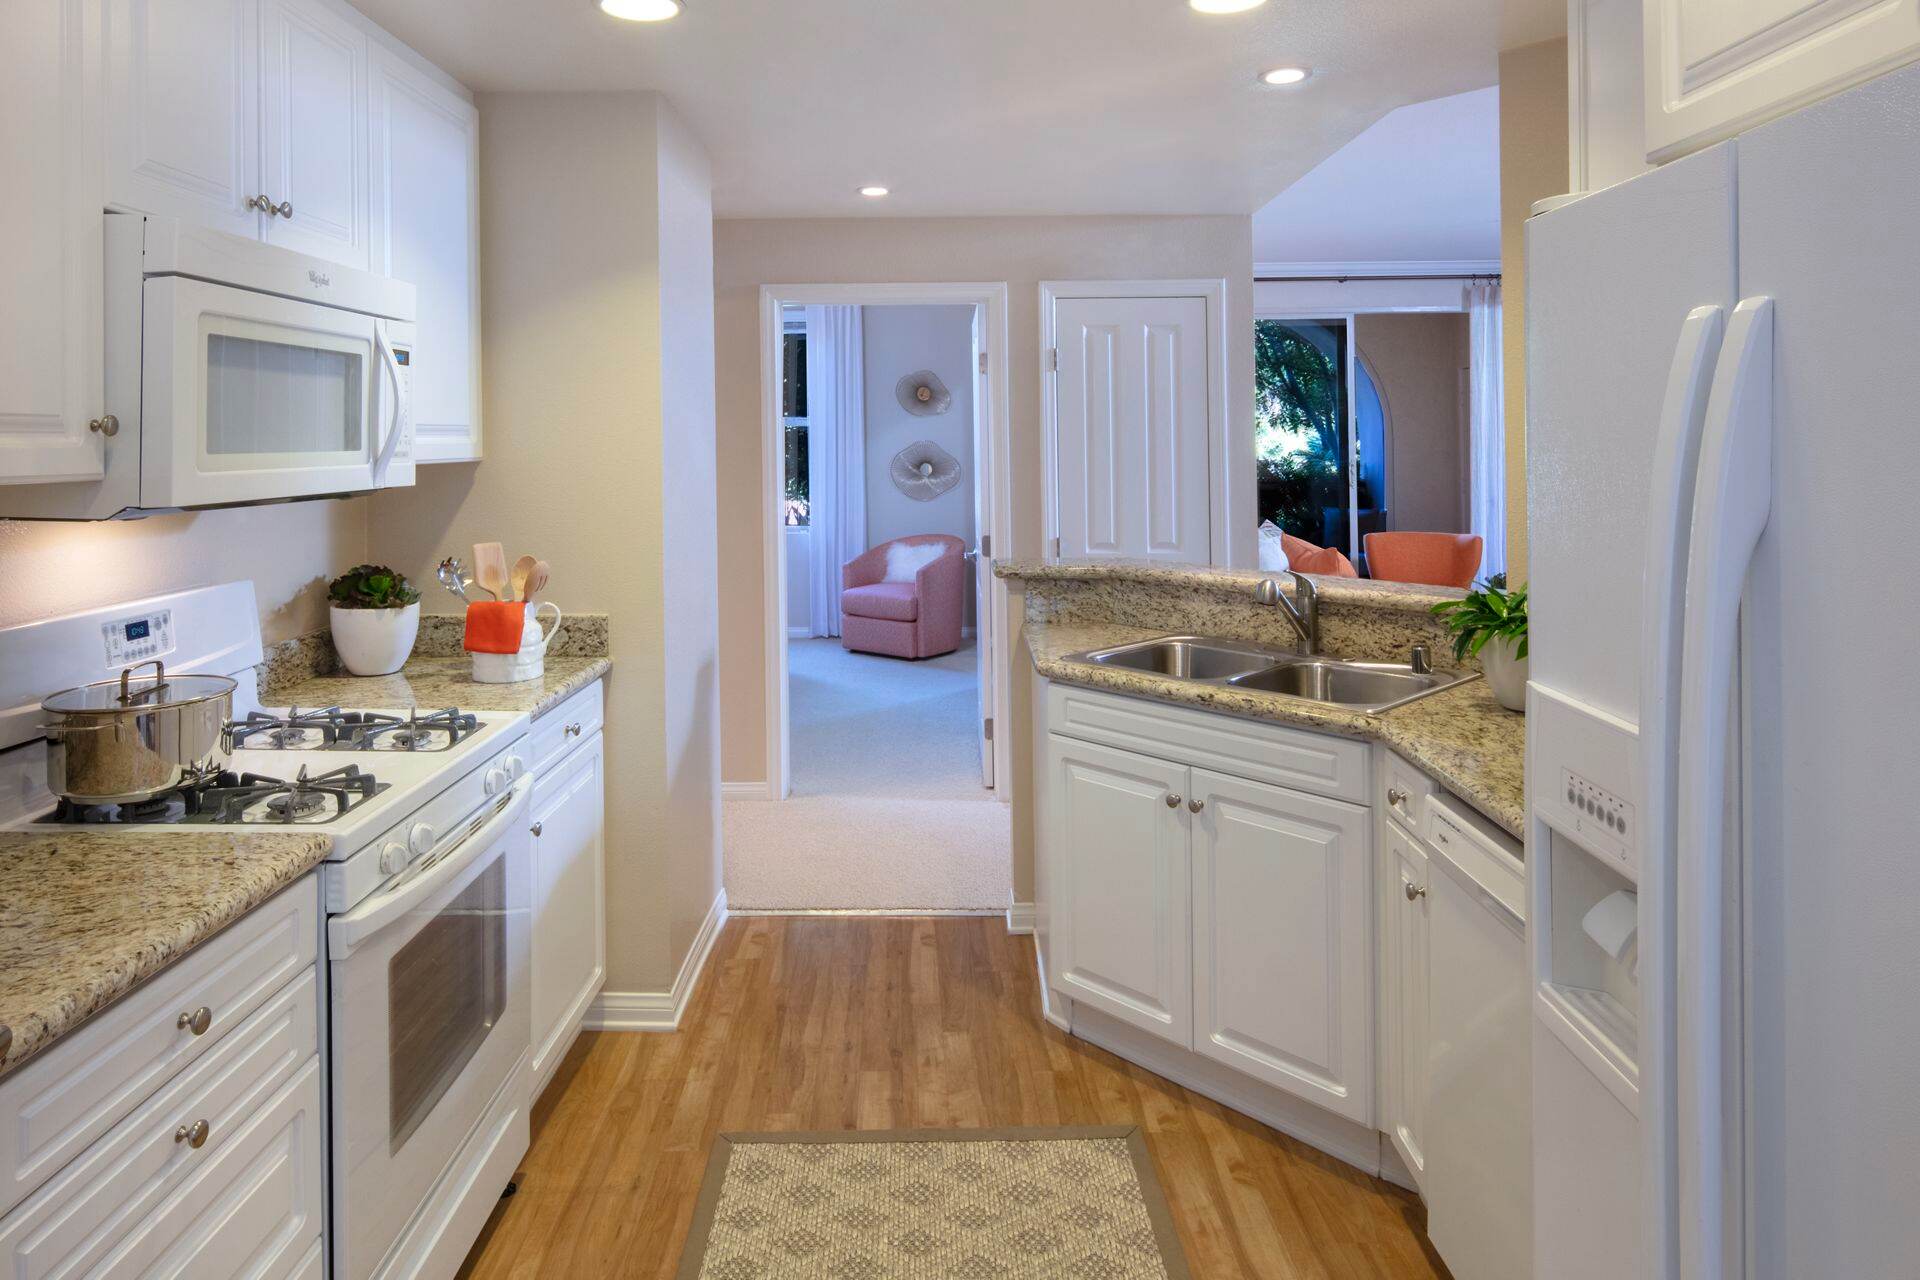 Interior view of kitchen at Portola Place Apartment Homes in Irvine, CA.